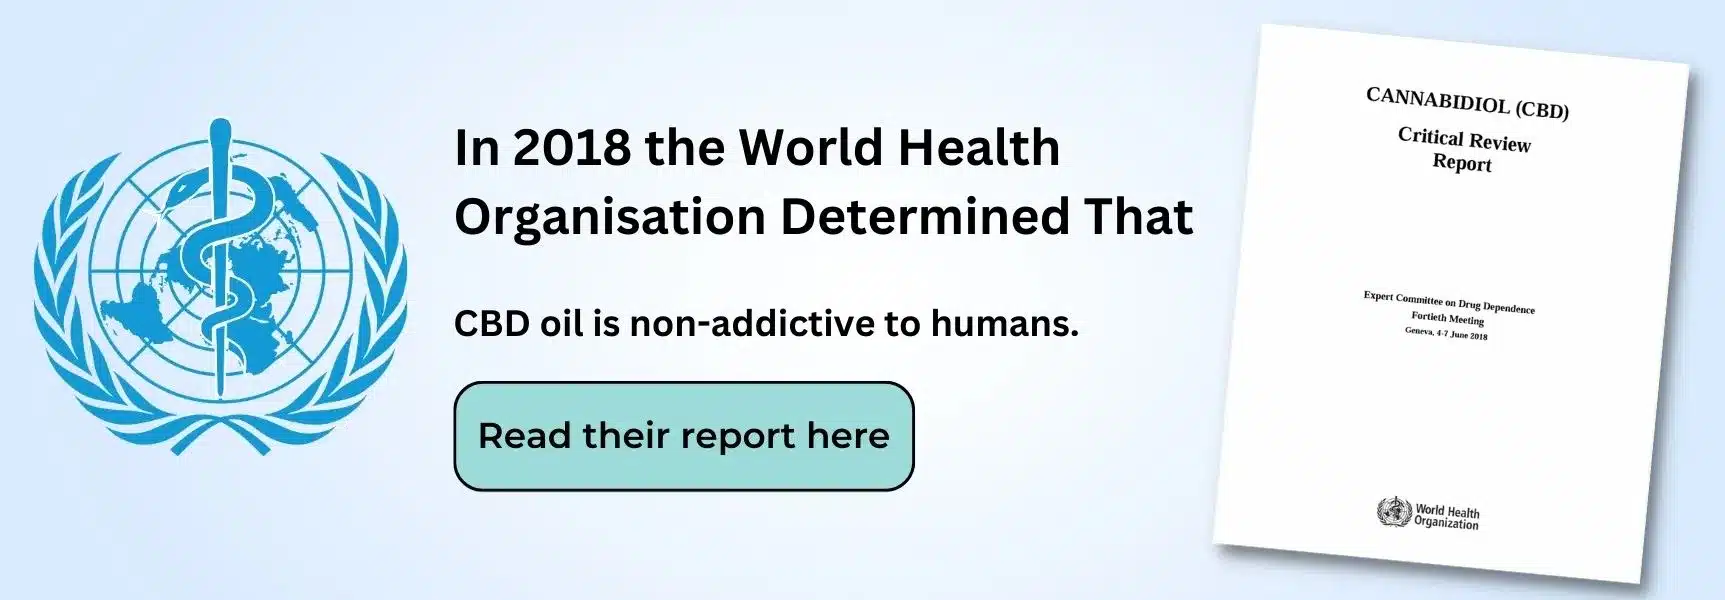 a banner saying that in 2018 the World Health Organization deemed CBD to be non-addictive and pose little public safety concerns. This banner clicks through to the report by the WHO.